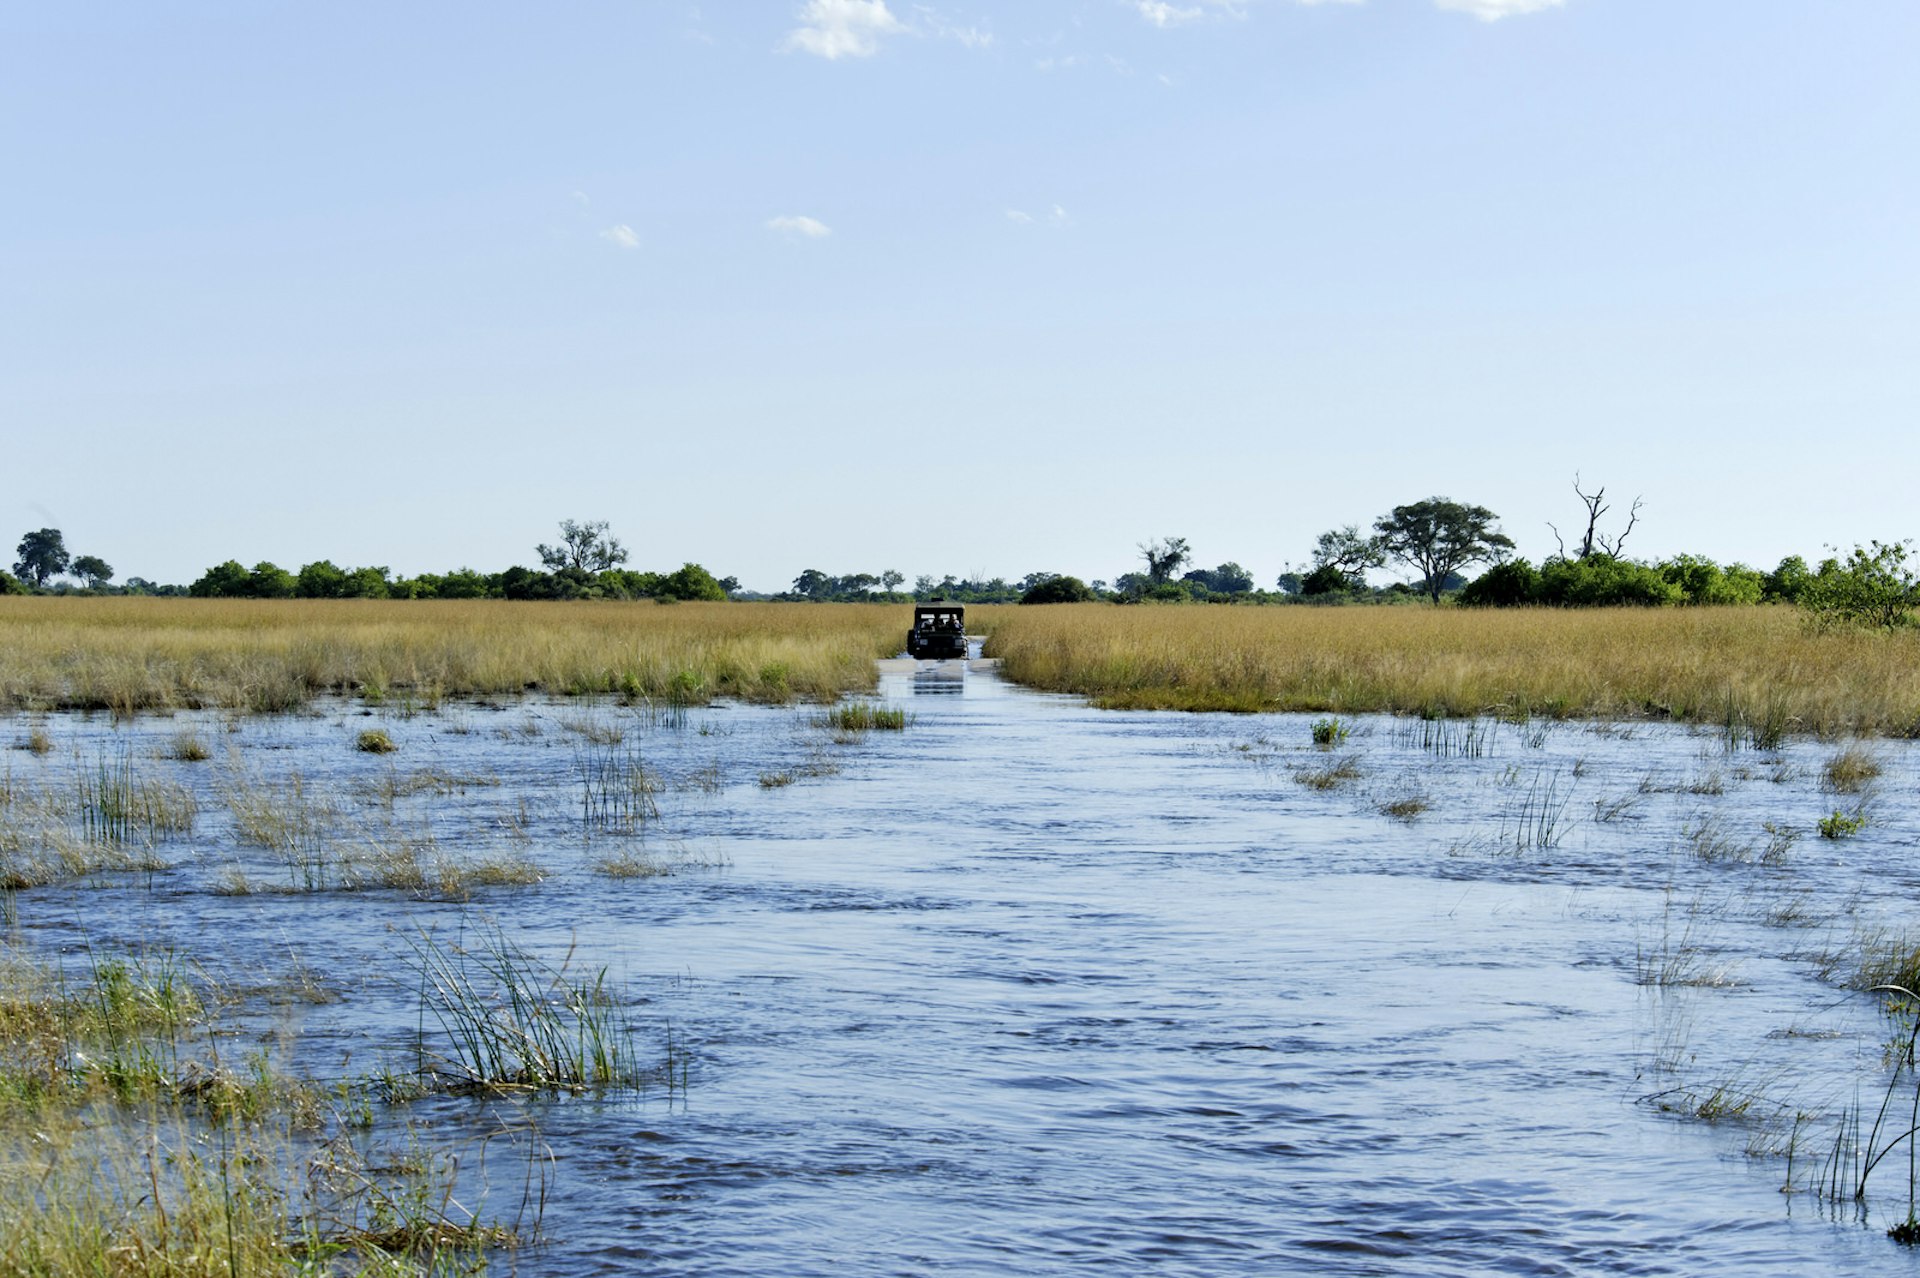 You might need specialist driving skills to tackle Botswana's Okavango Delta at the end of the rainy season © Brytta / Getty Images